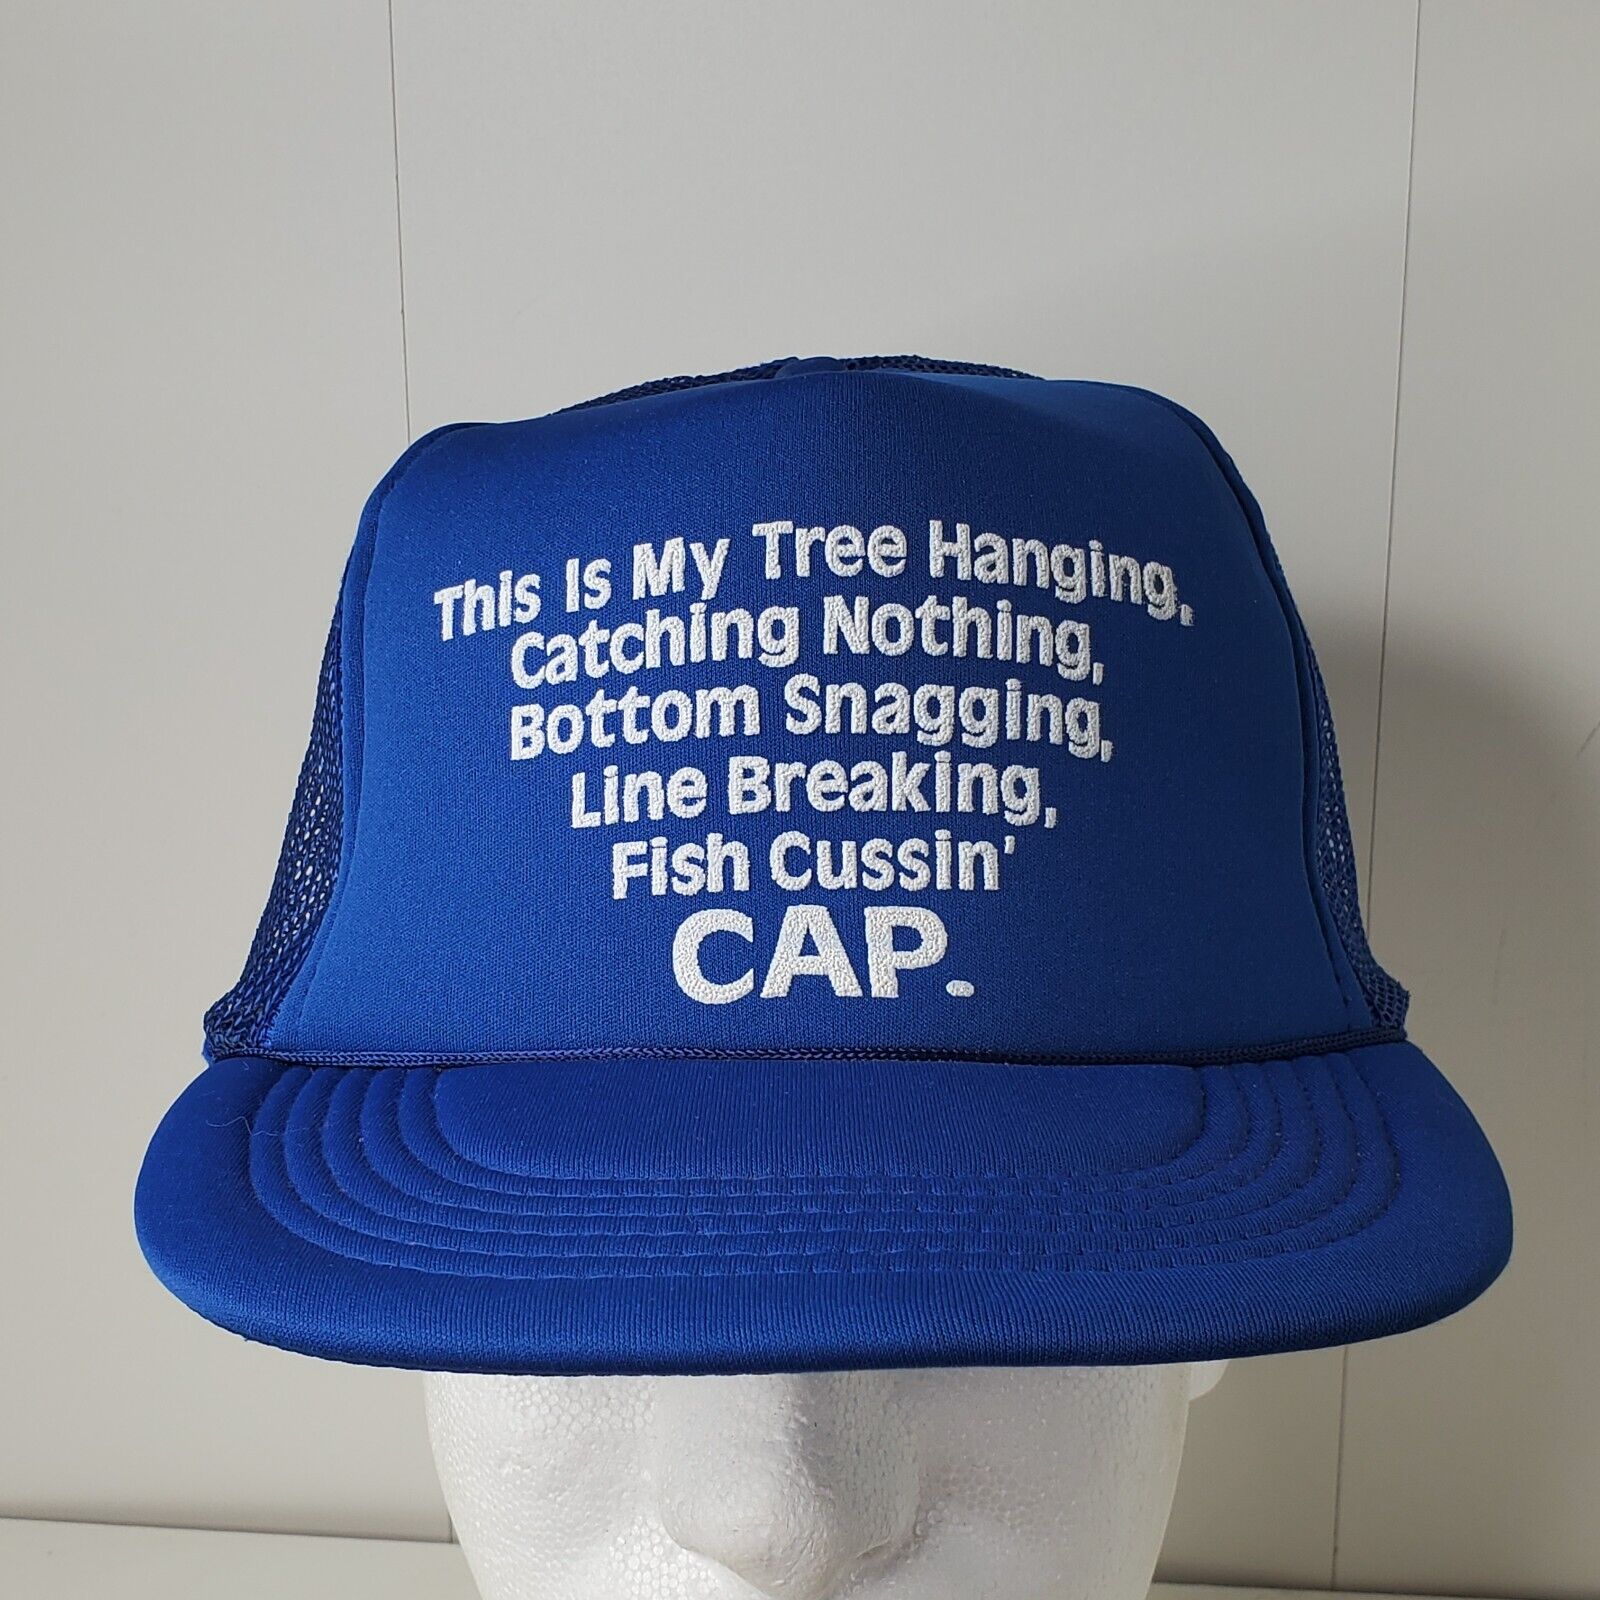 Vintage Trucker hat // This is my tree hanging, catching nothing, bottom snagging, line breaking fish cussin cap // funny fishing hat cap